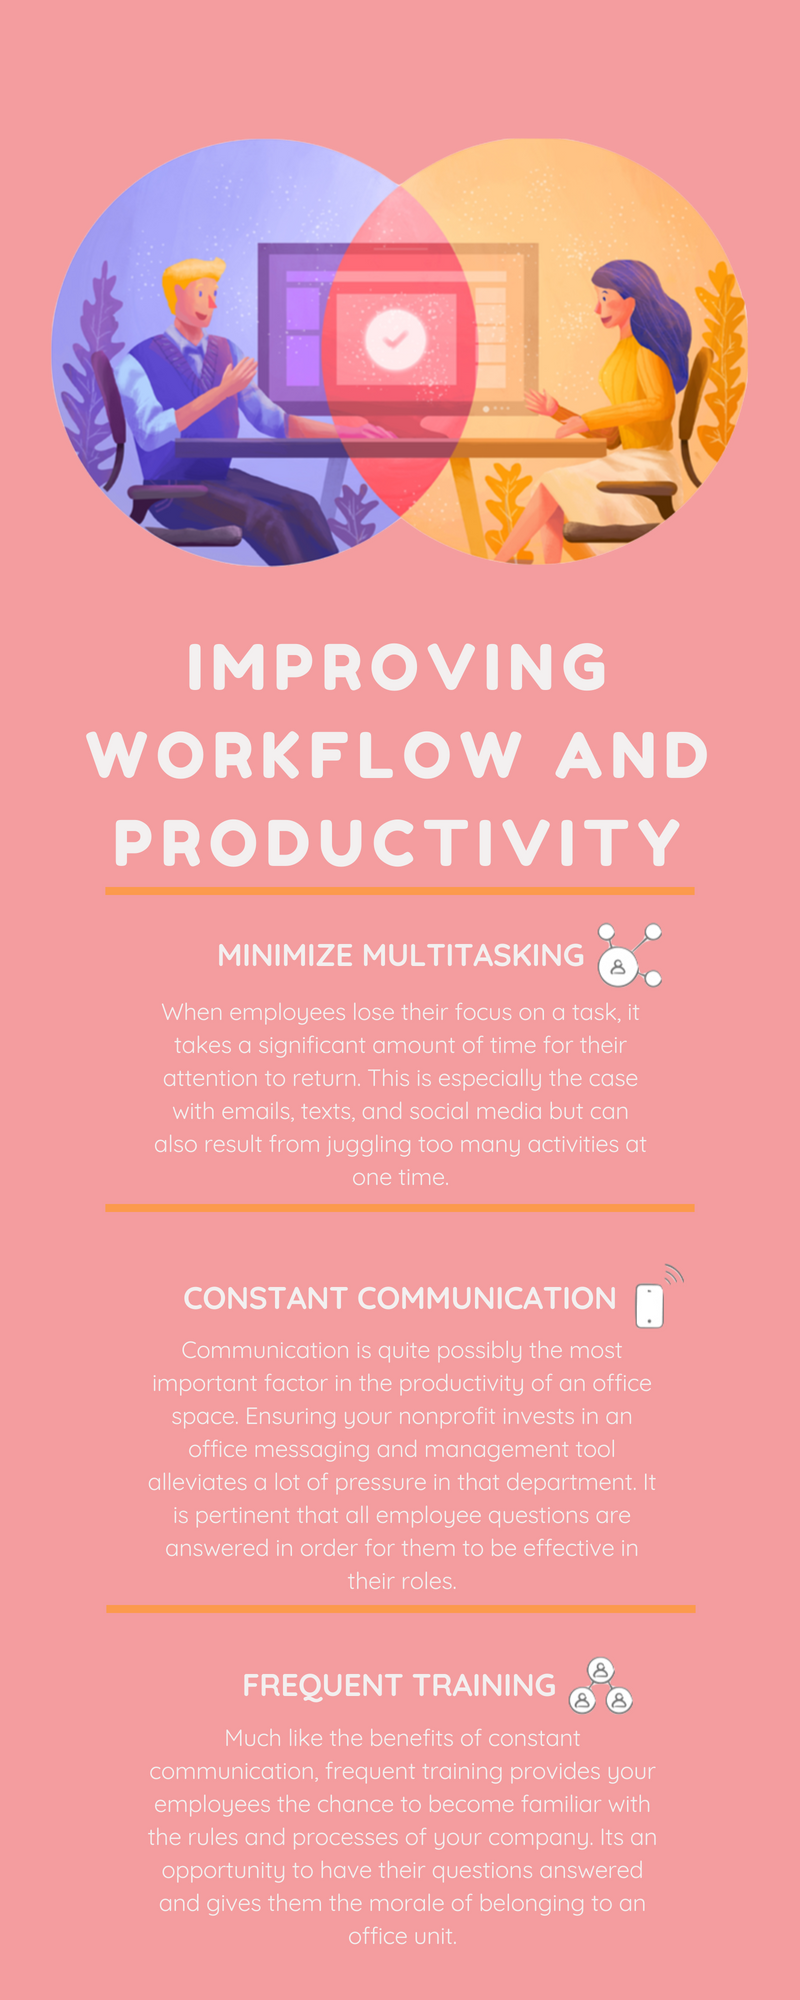 Improving Workflow and Productivity